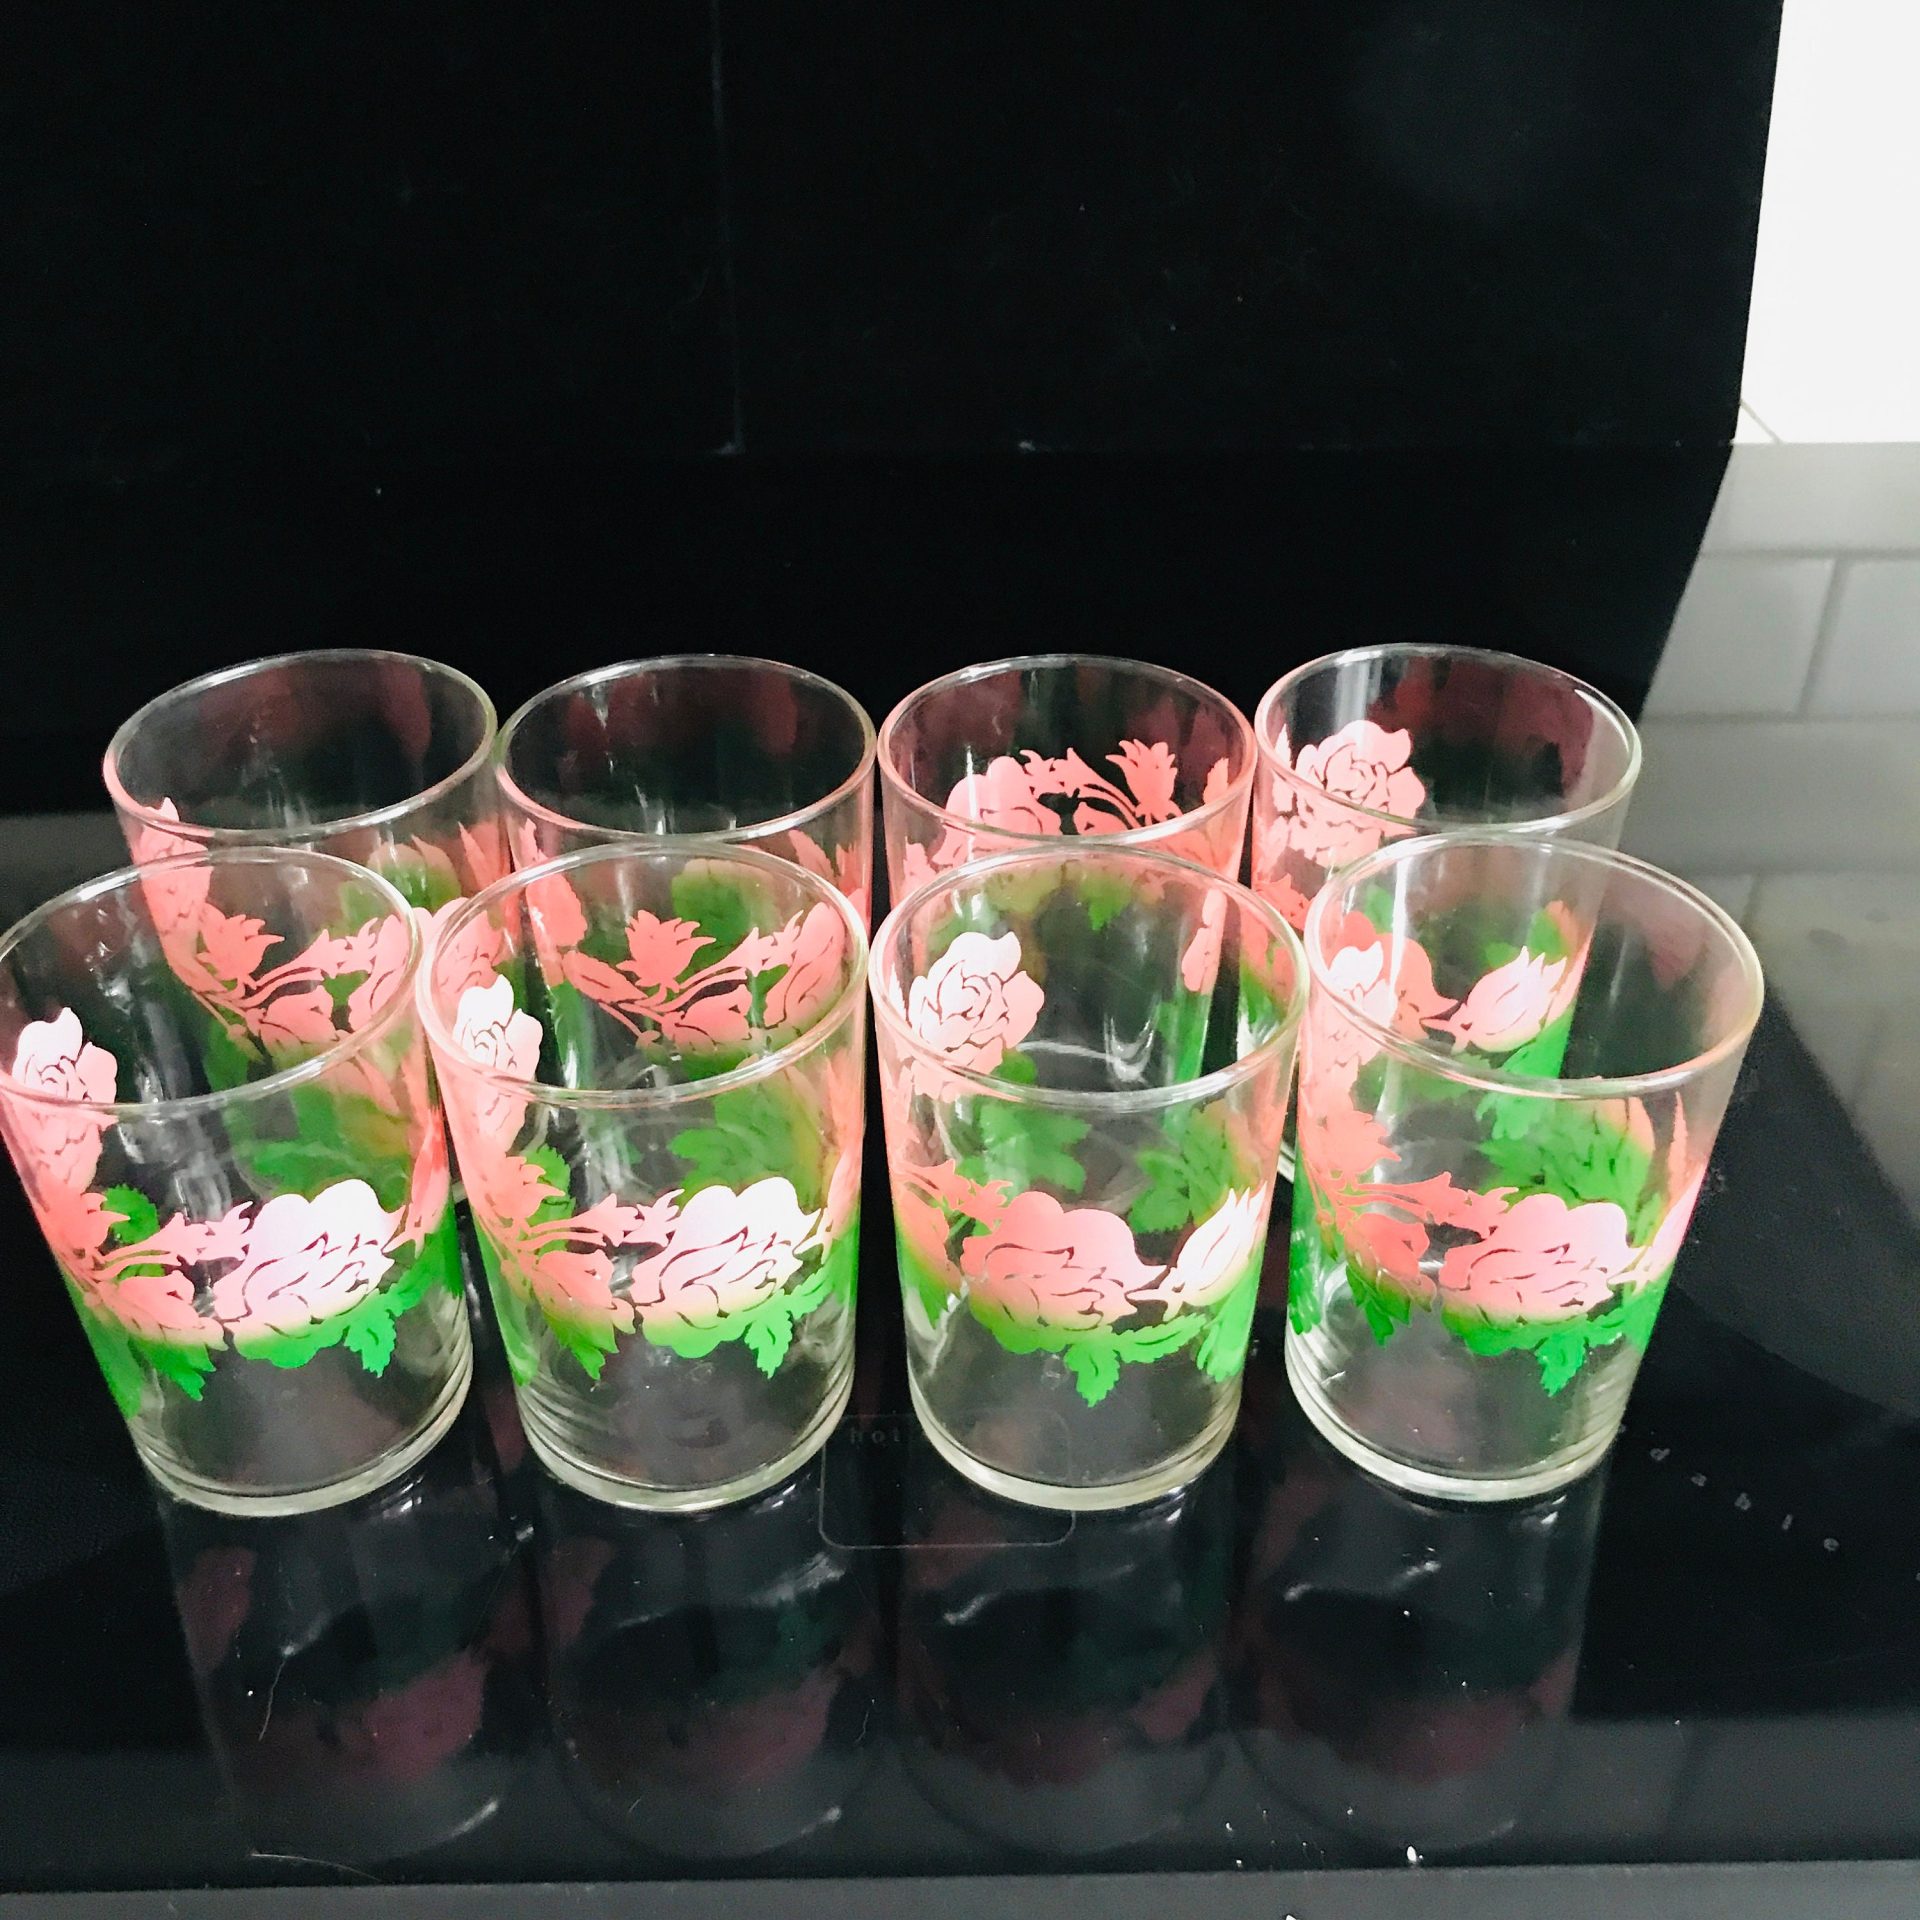 https://www.truevintageantiques.com/wp-content/uploads/2022/05/vintage-juice-glasses-8-retro-kitchen-pink-and-green-mod-iced-tea-collectible-display-water-glasses-farmhouse-retro-home-629172477-scaled.jpg